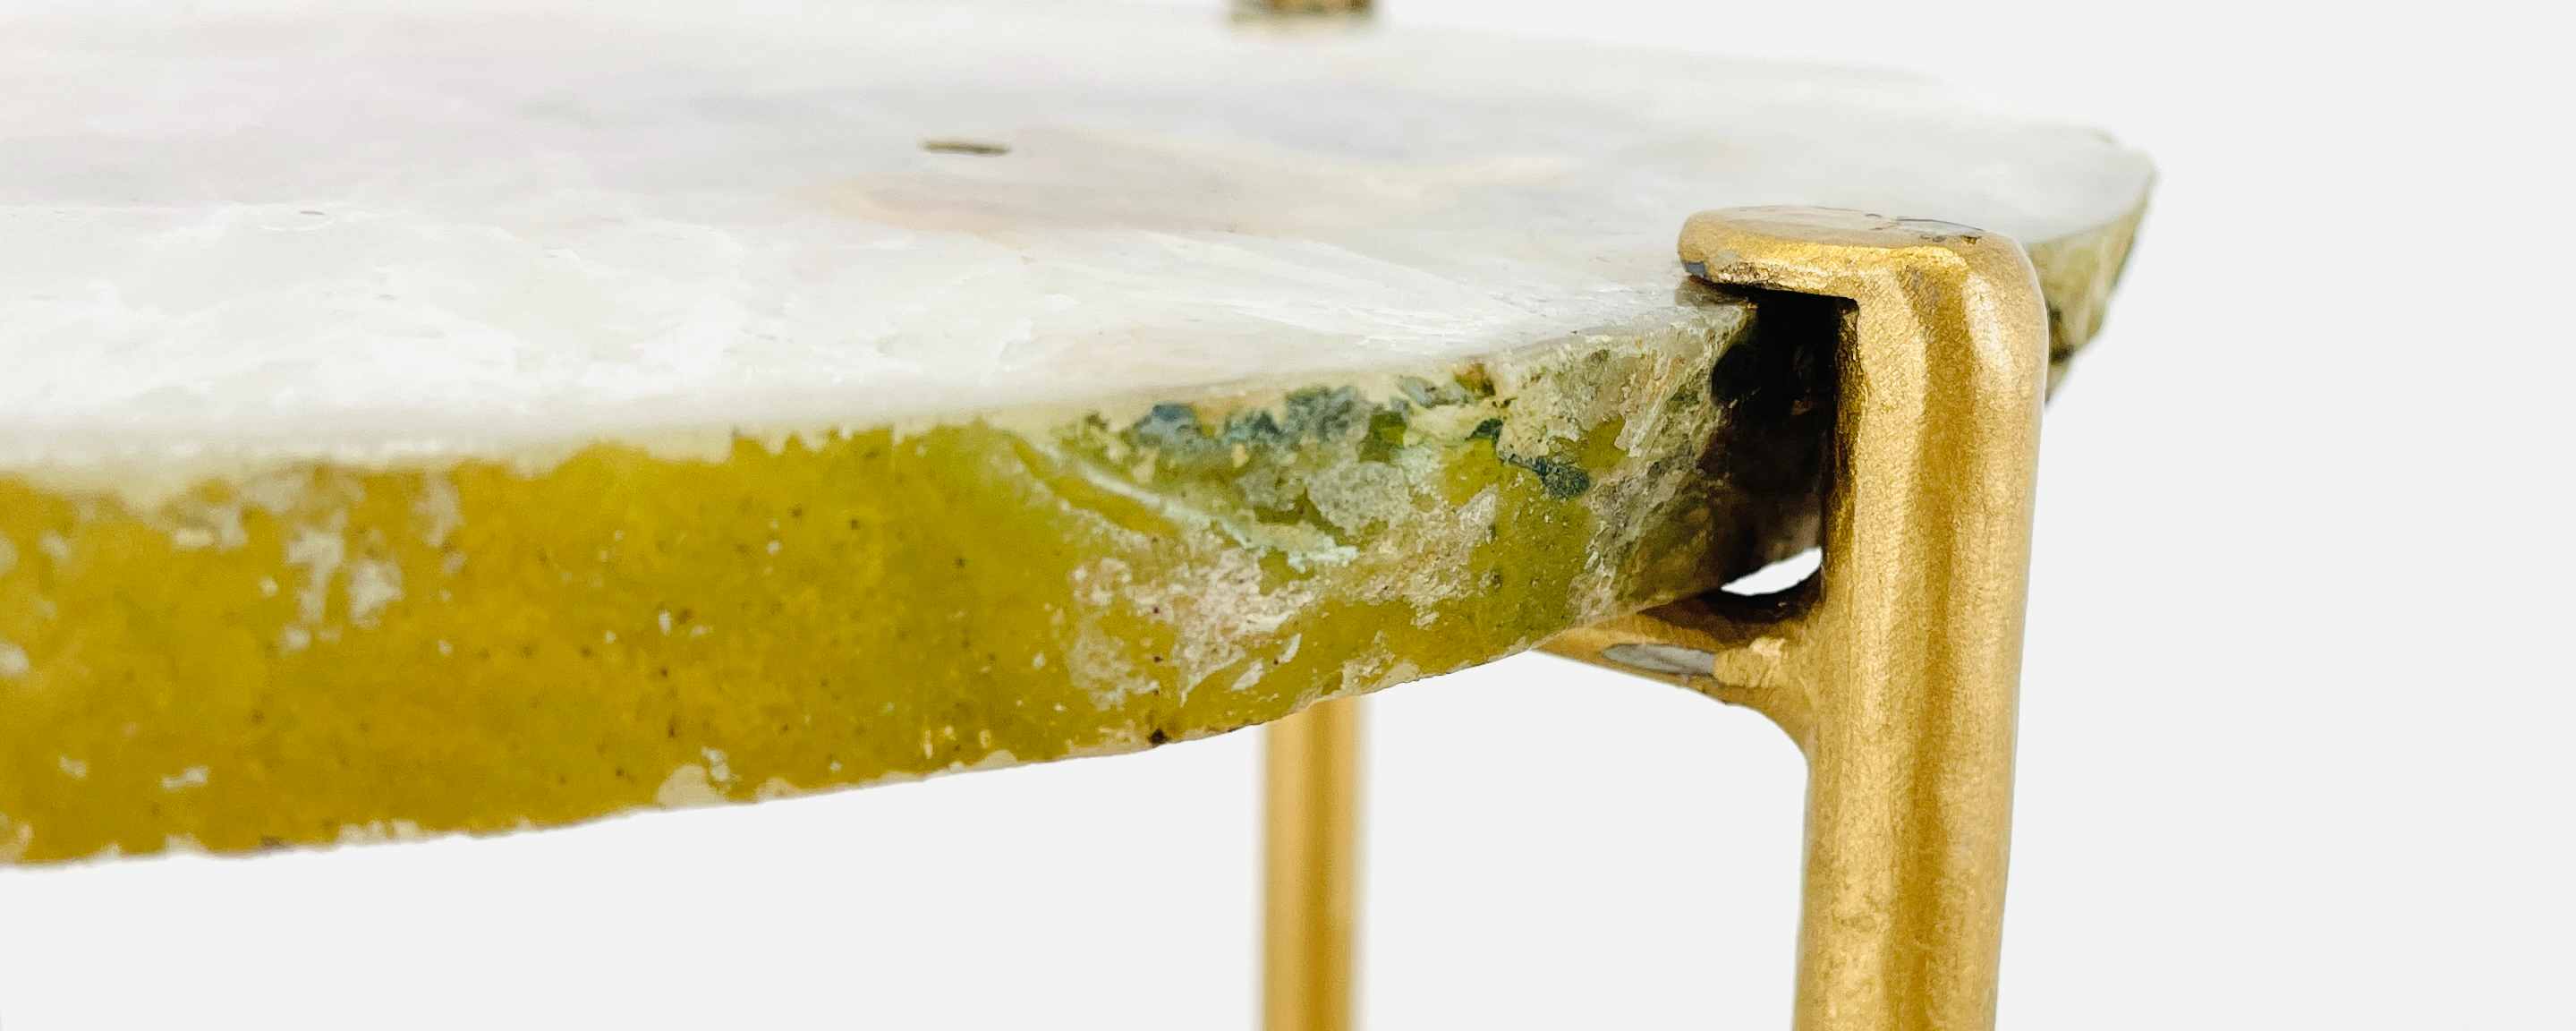 the sliced geode occasional table